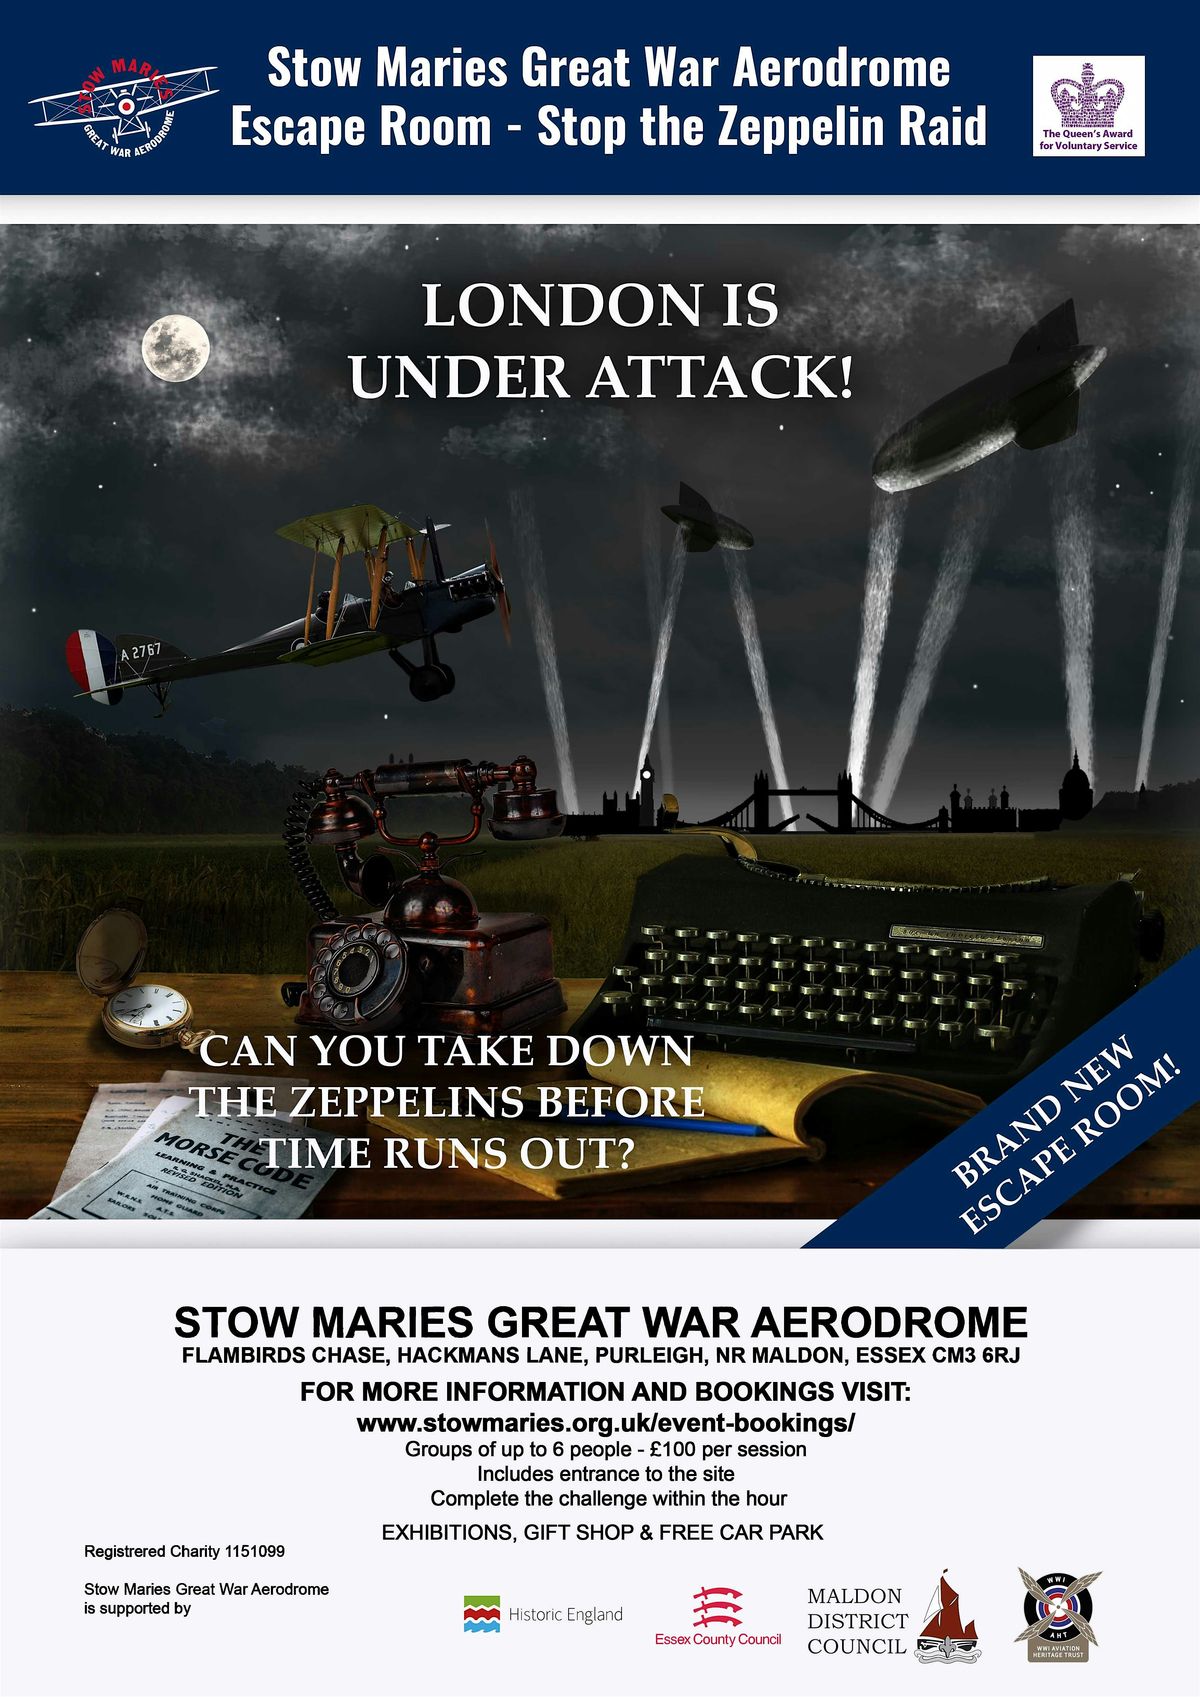 Stow Maries Great War Aerodrome Escape Room Experience 20 July